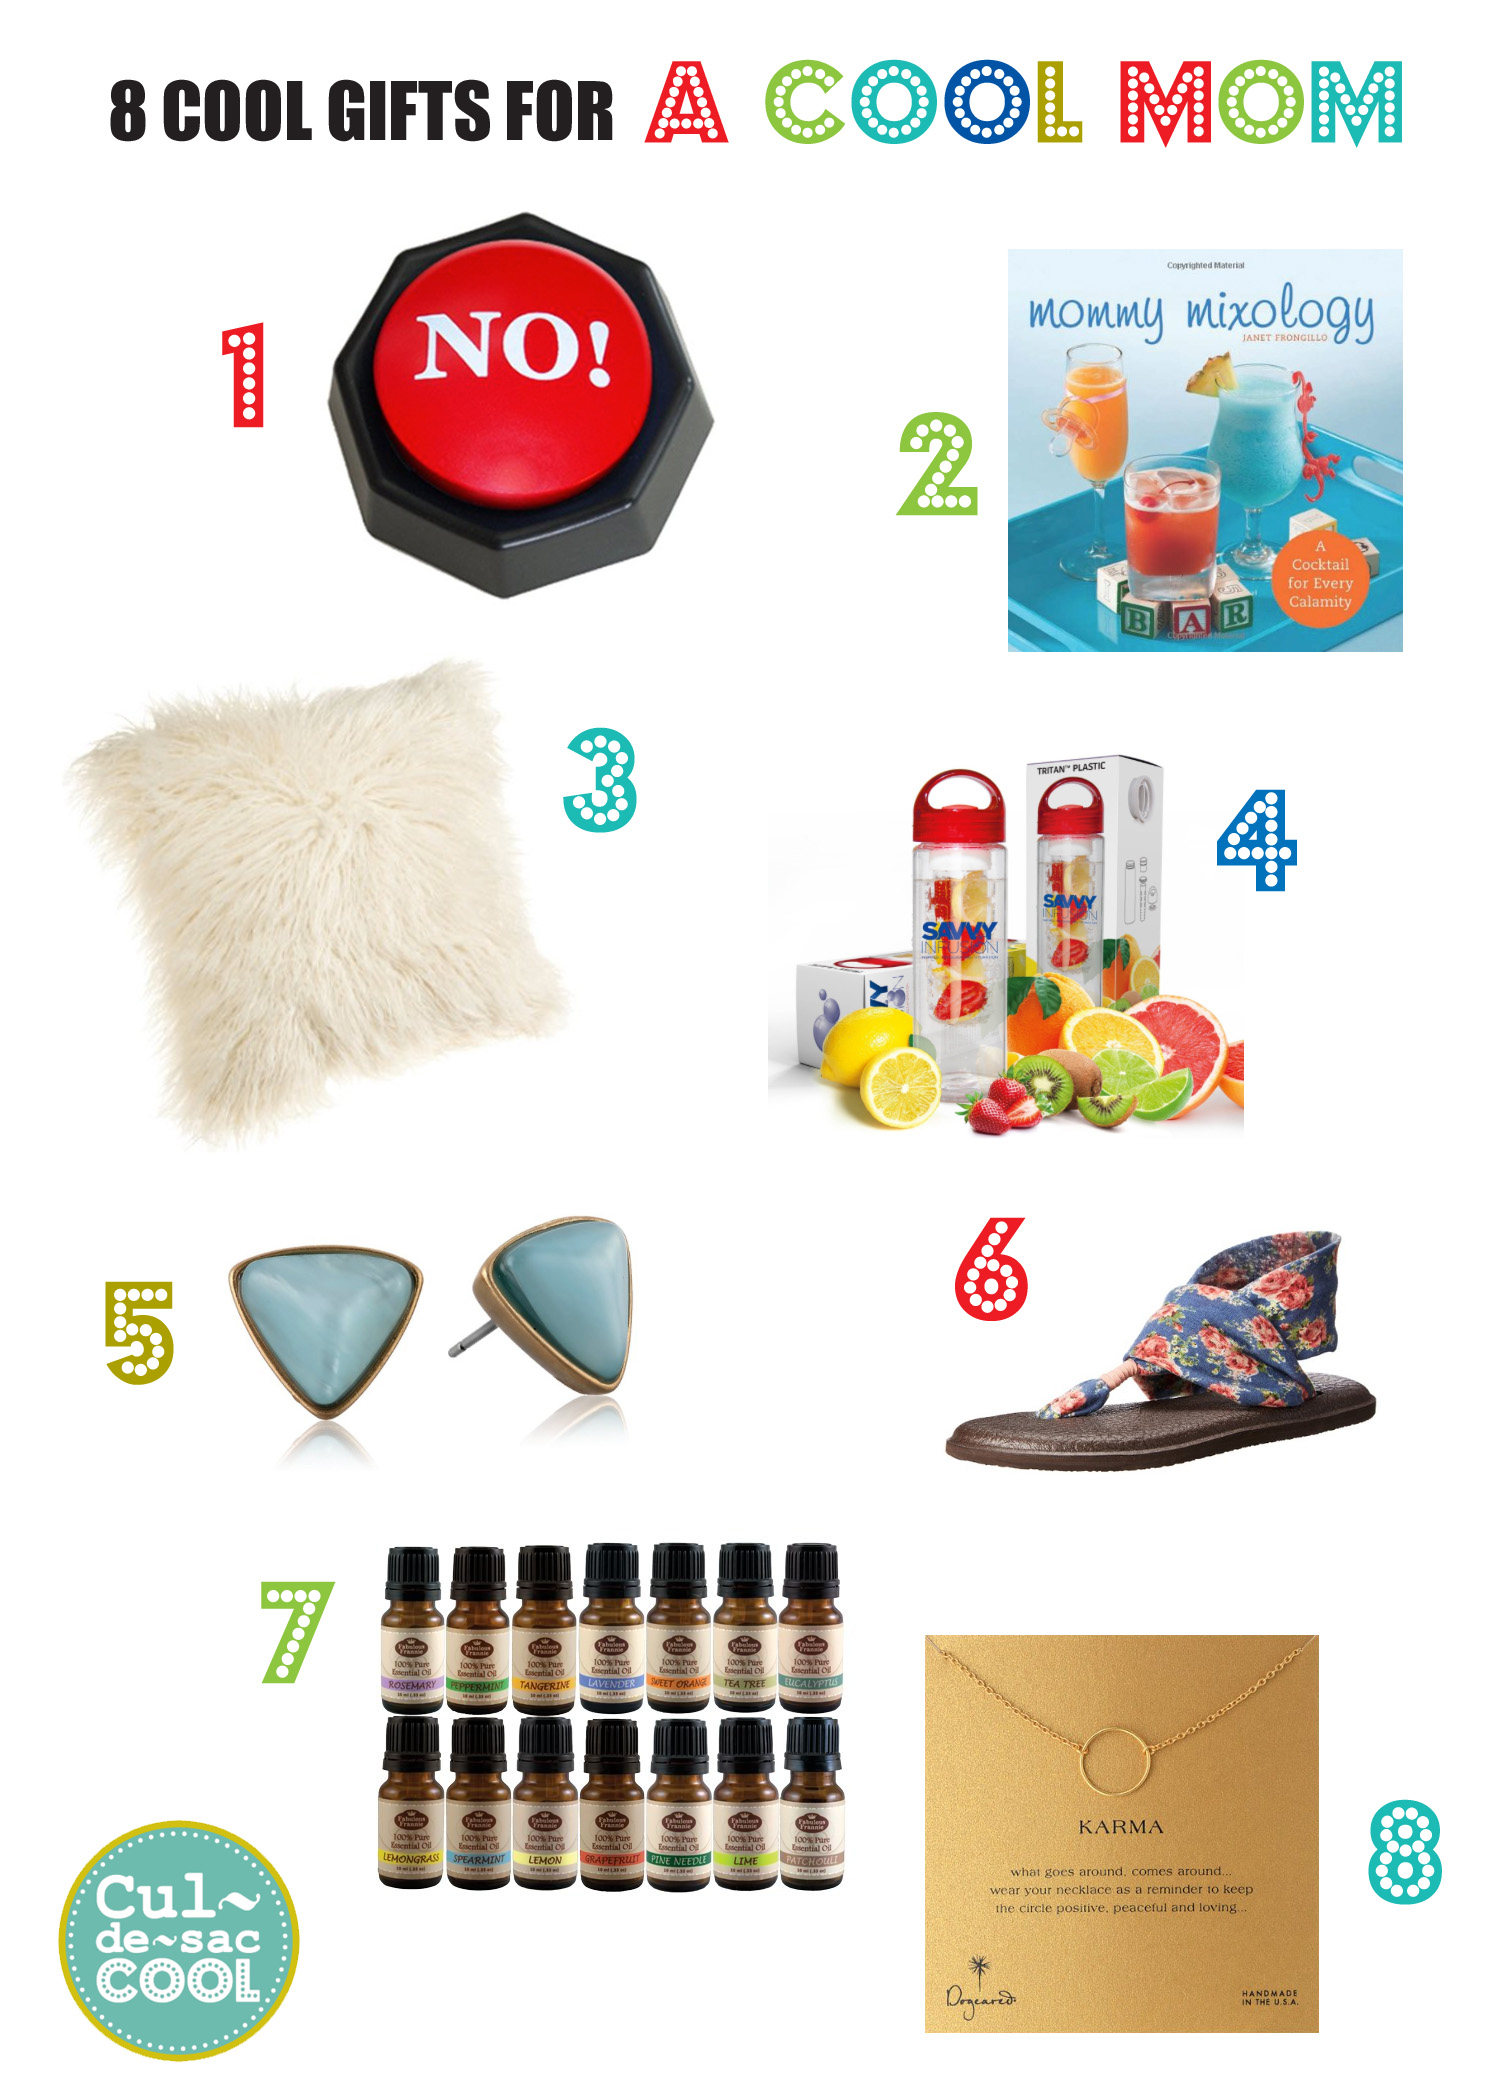 8 COOL GIFTS FOR COOL MOM